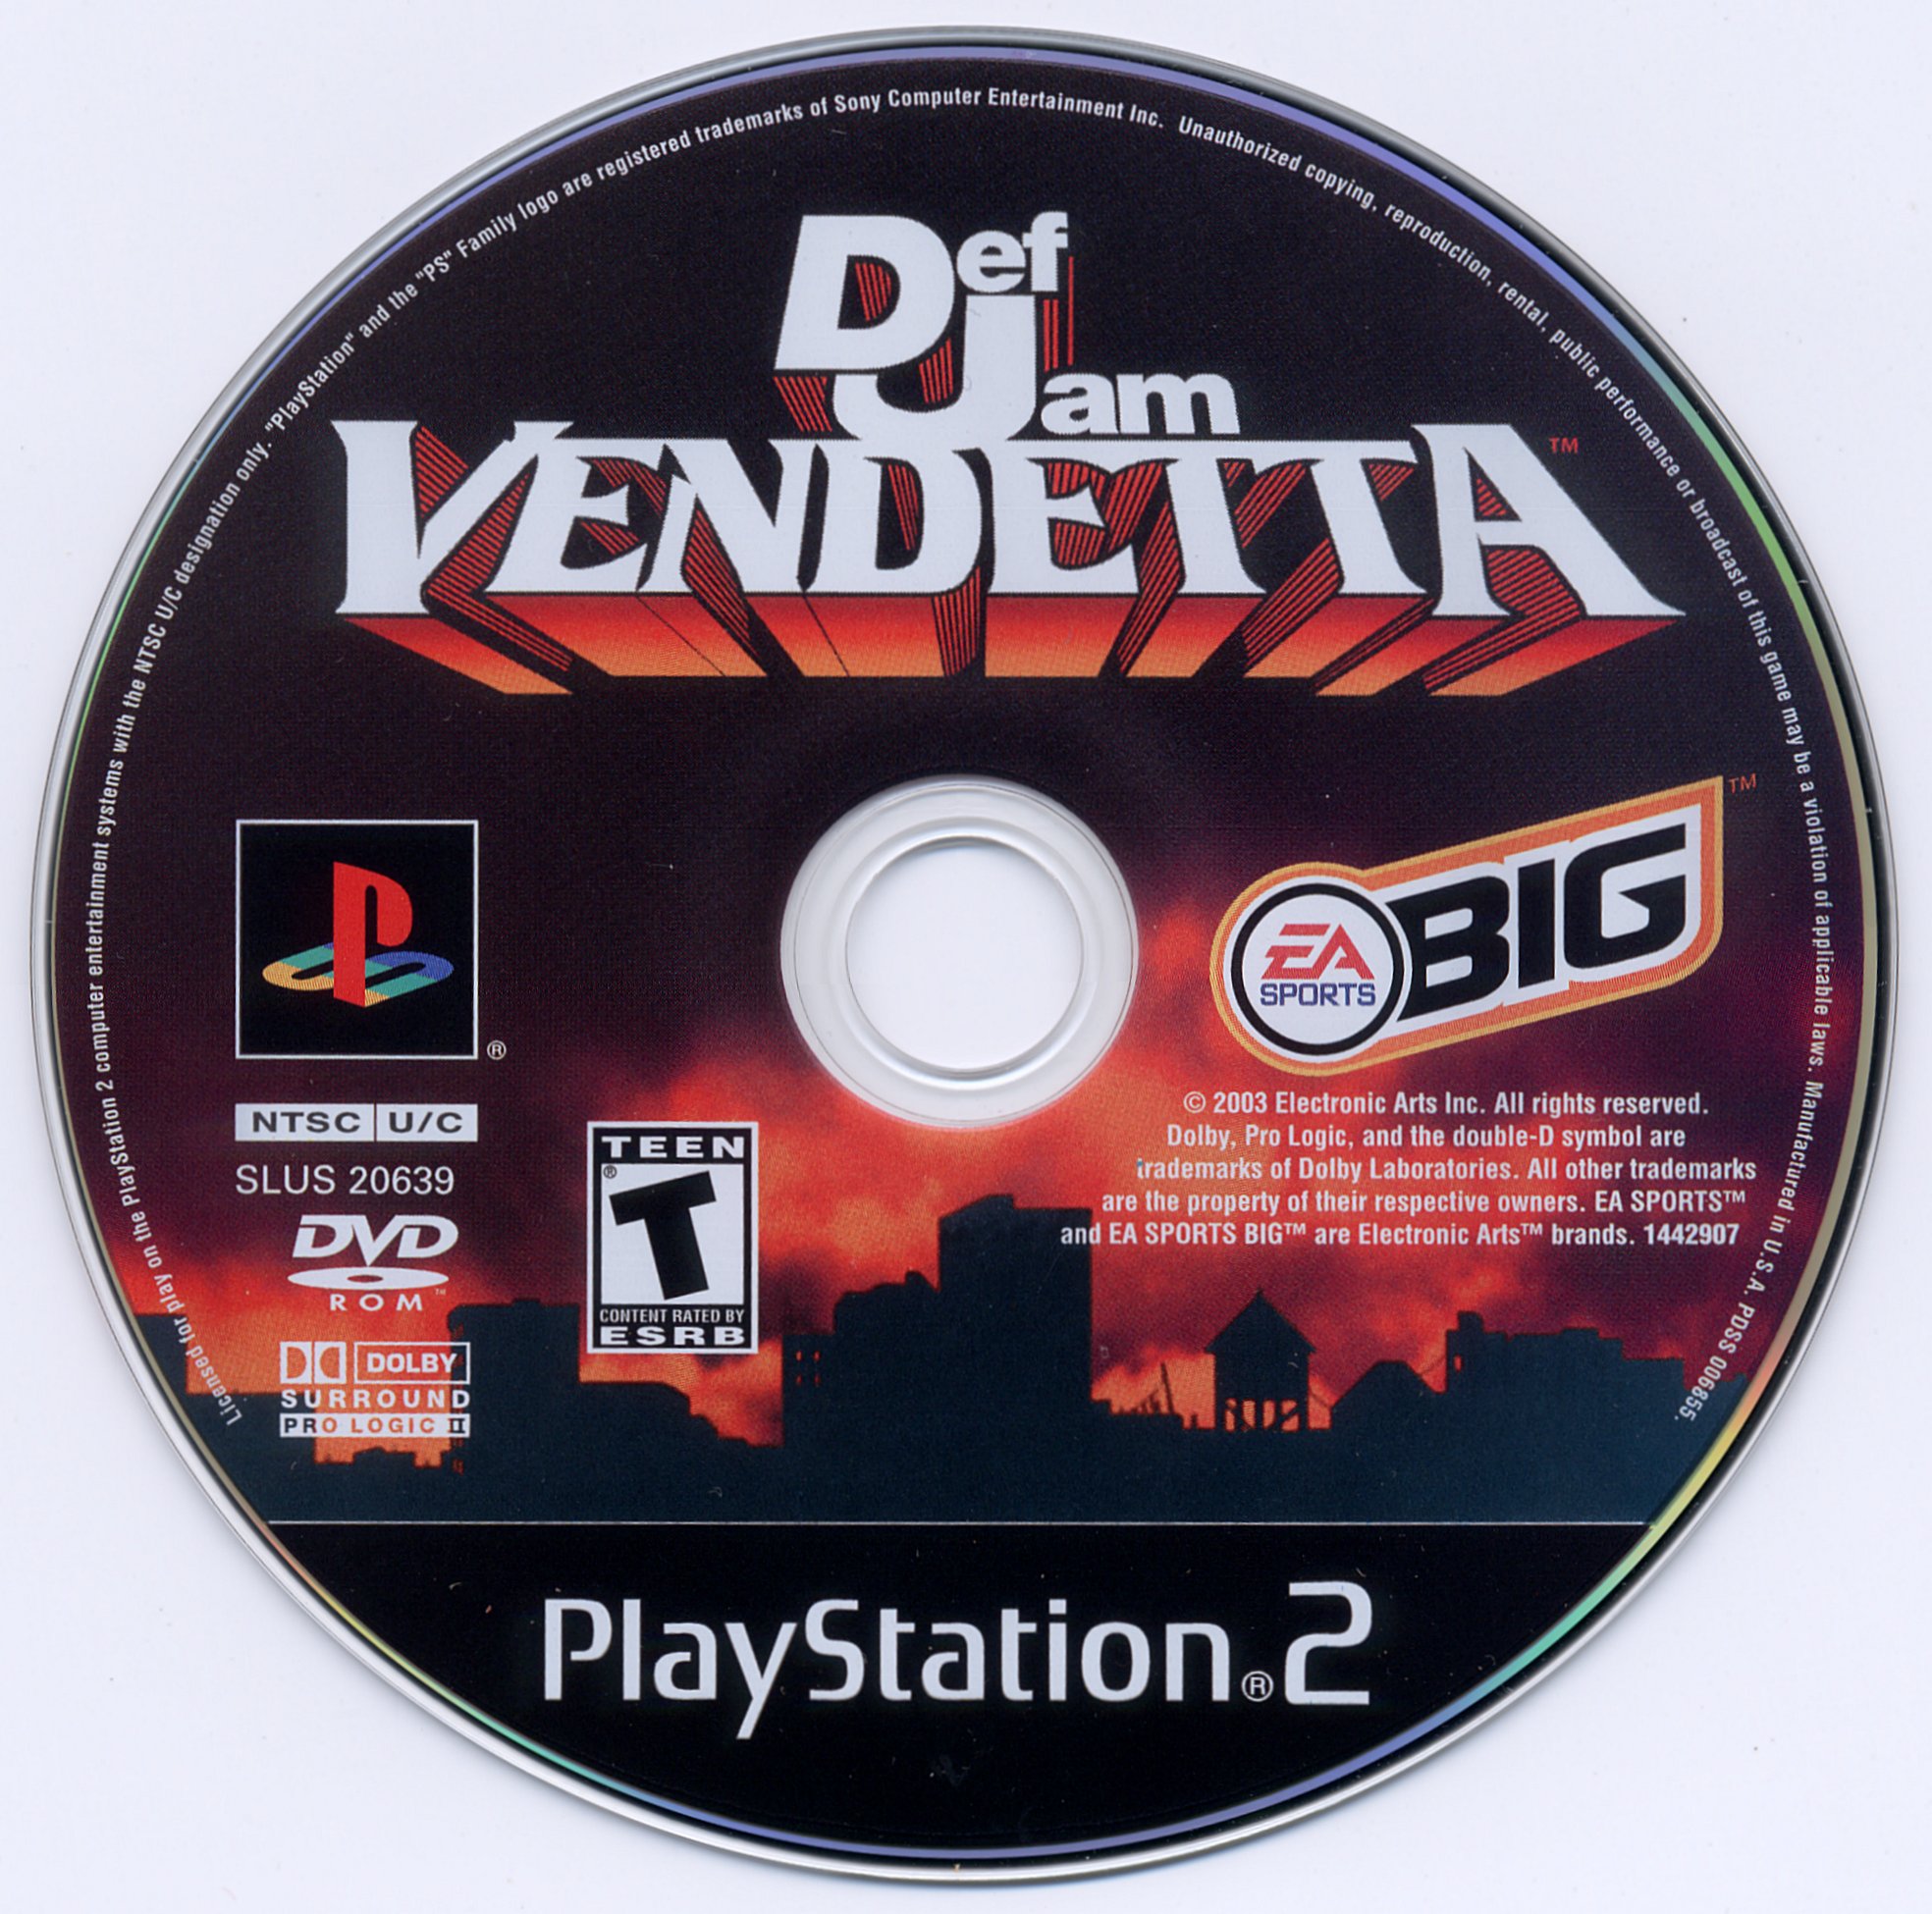 Def Jam Vendetta [SLUS 20639] (Sony Playstation 2) - Box Scans (1200DPI) :  Electronic Arts : Free Download, Borrow, and Streaming : Internet Archive